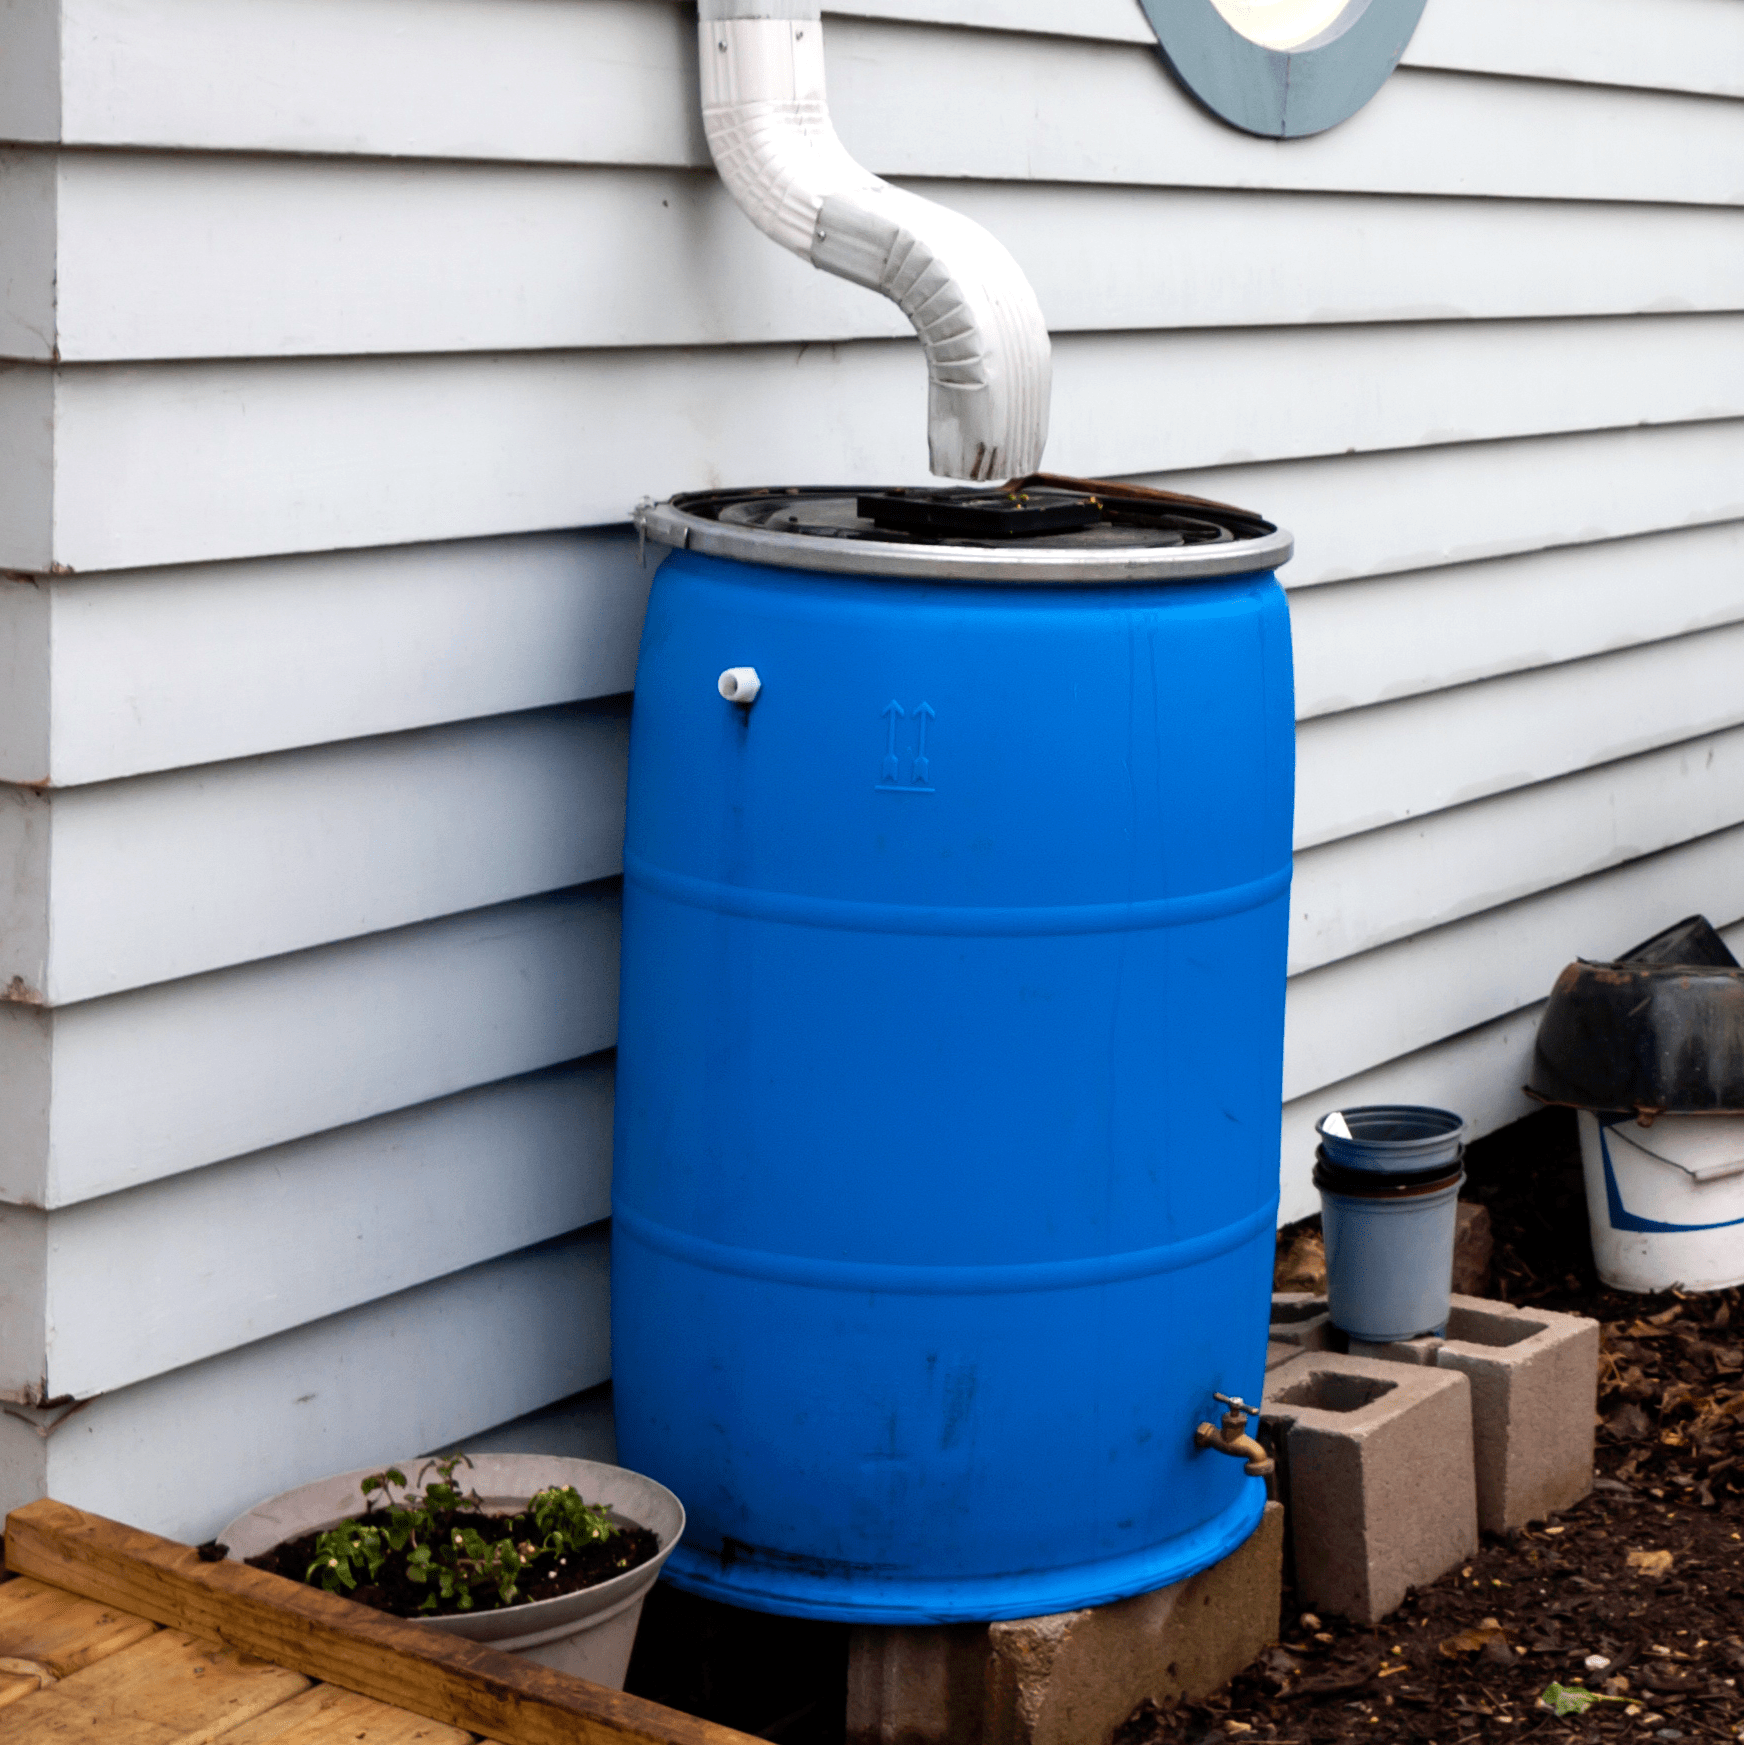 Rainwater Collection, Private Water Systems, Drinking Water, Healthy  Water